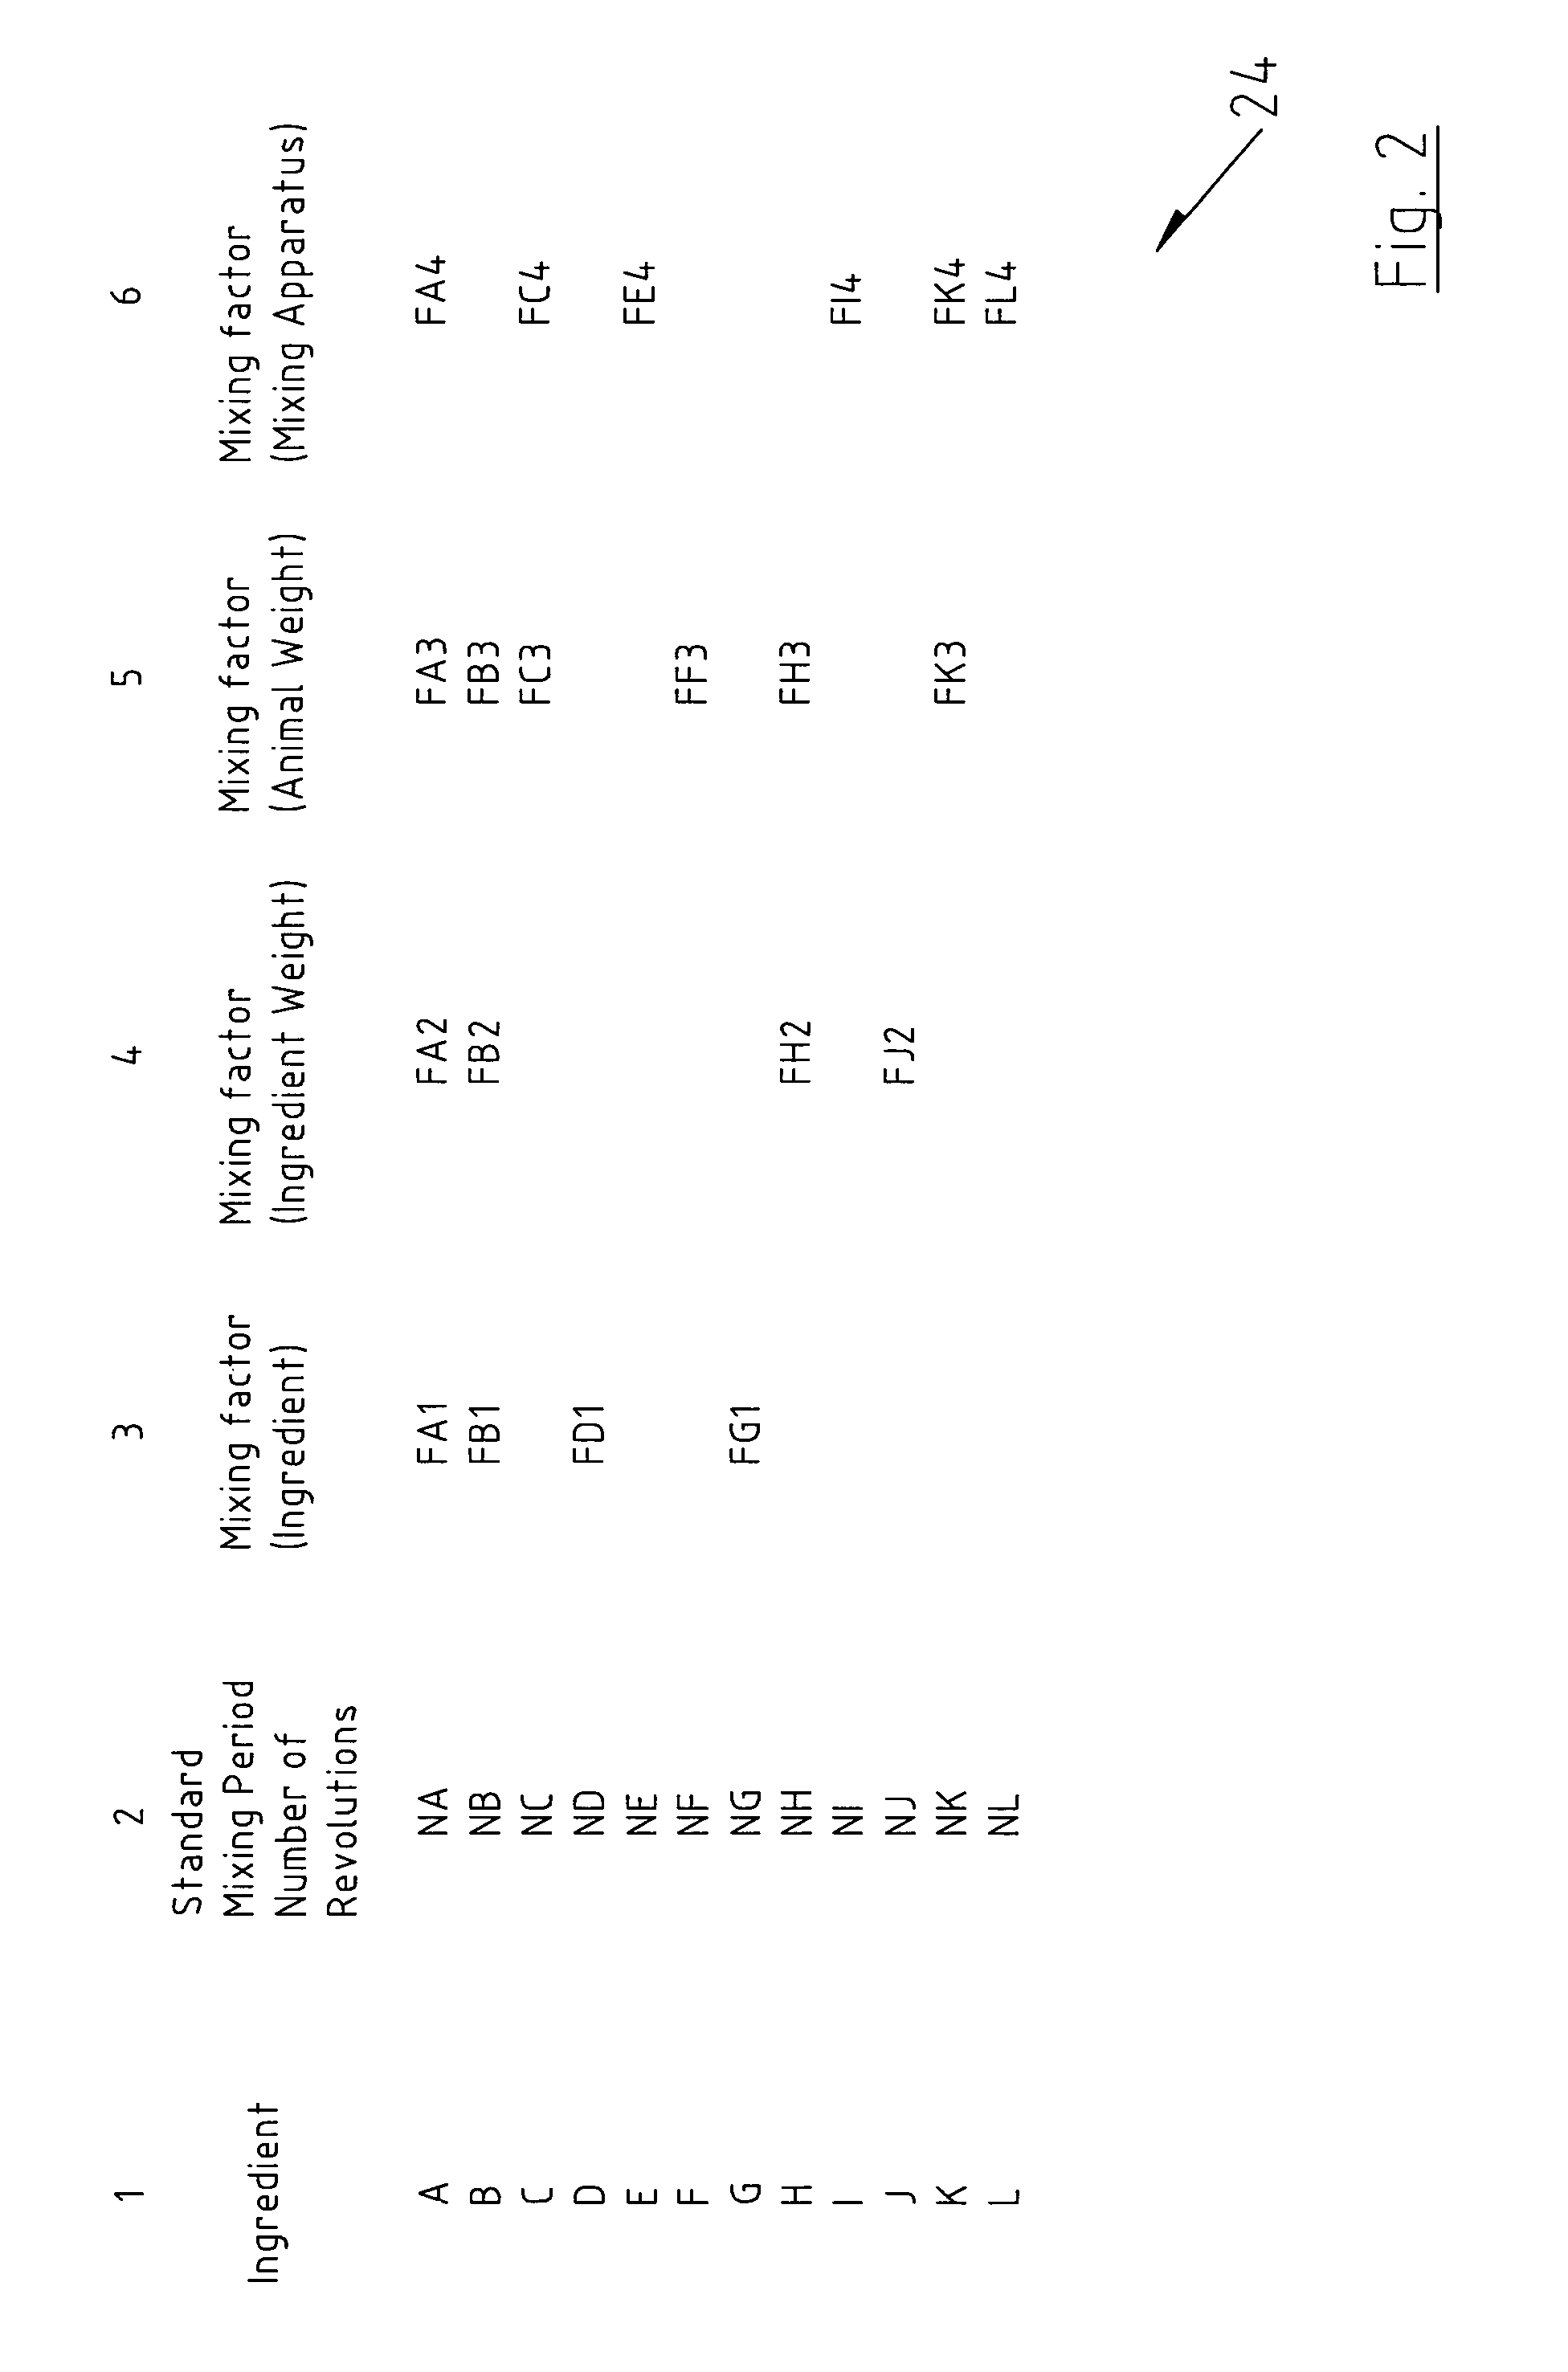 Method and apparatus for determining a mixing regime for use in the preparation of animal feed from a set of ingredients, and a system for producing the animal feed